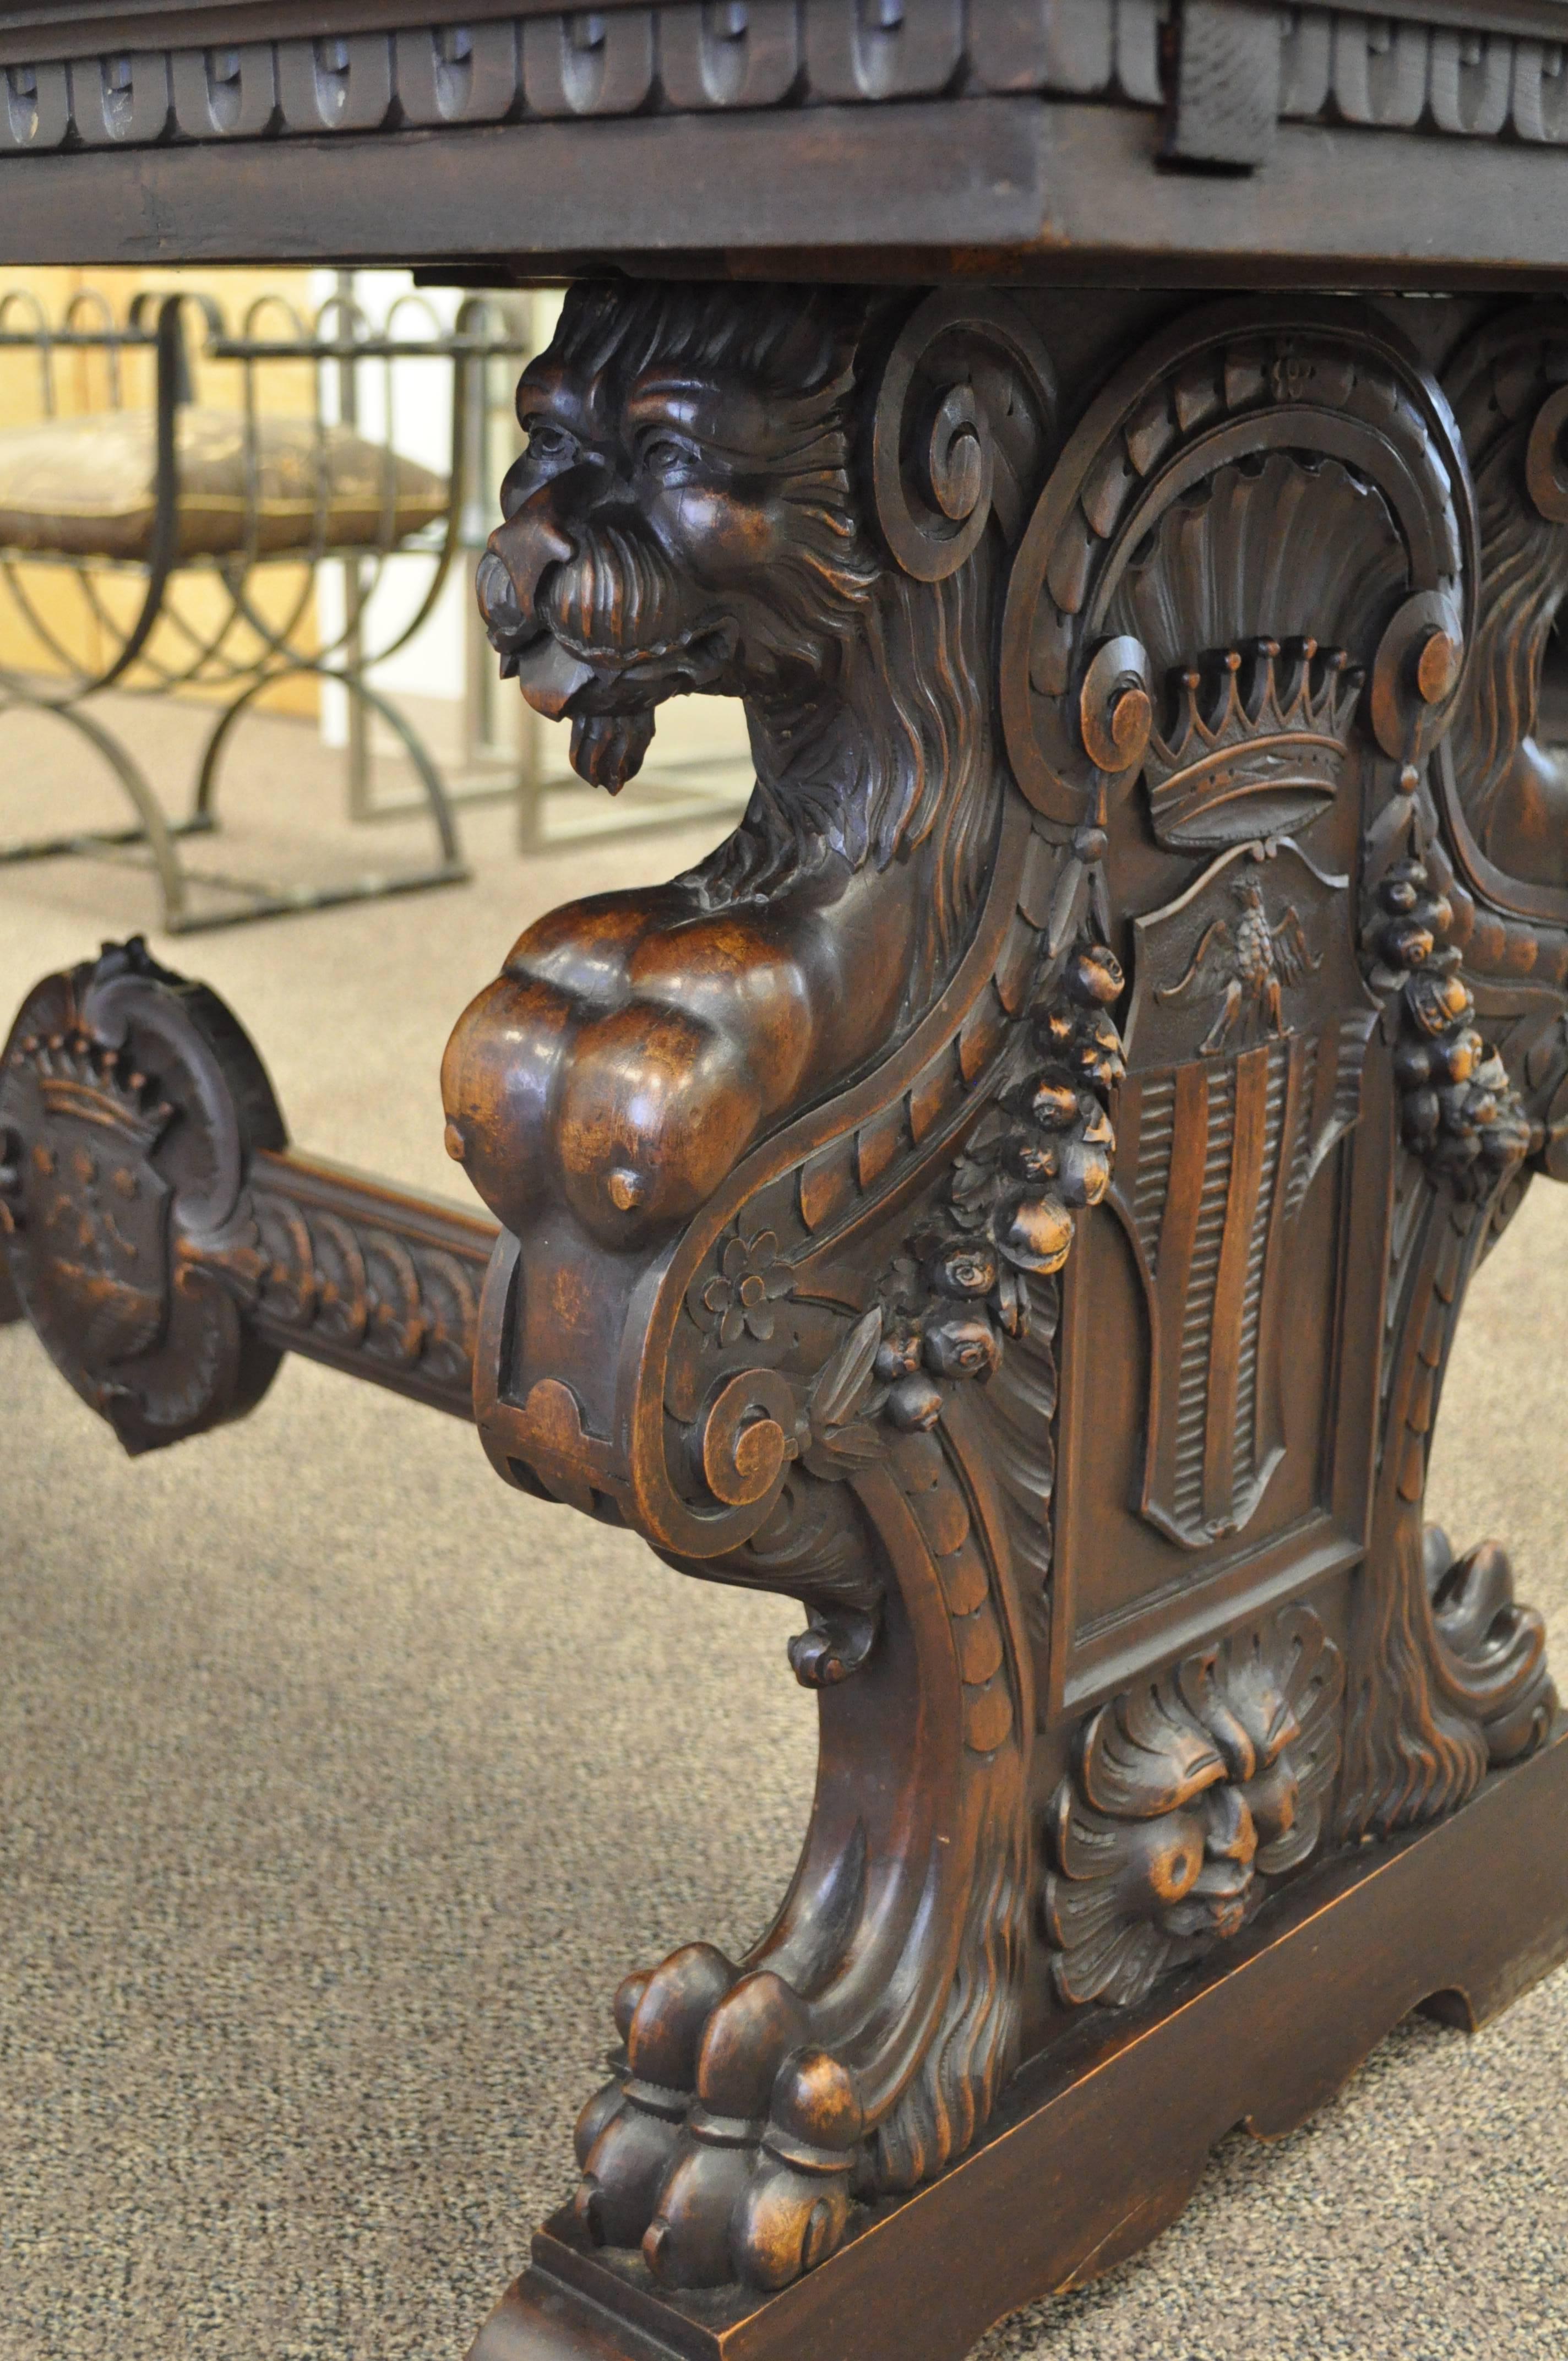 Solid walnut Renaissance Revival trestle table which features carved trestle ends depicting griffins with female busts, northwind faces, shields, crowns and floral drapes, united by a carved stretcher. Table can be used in many ways including use as